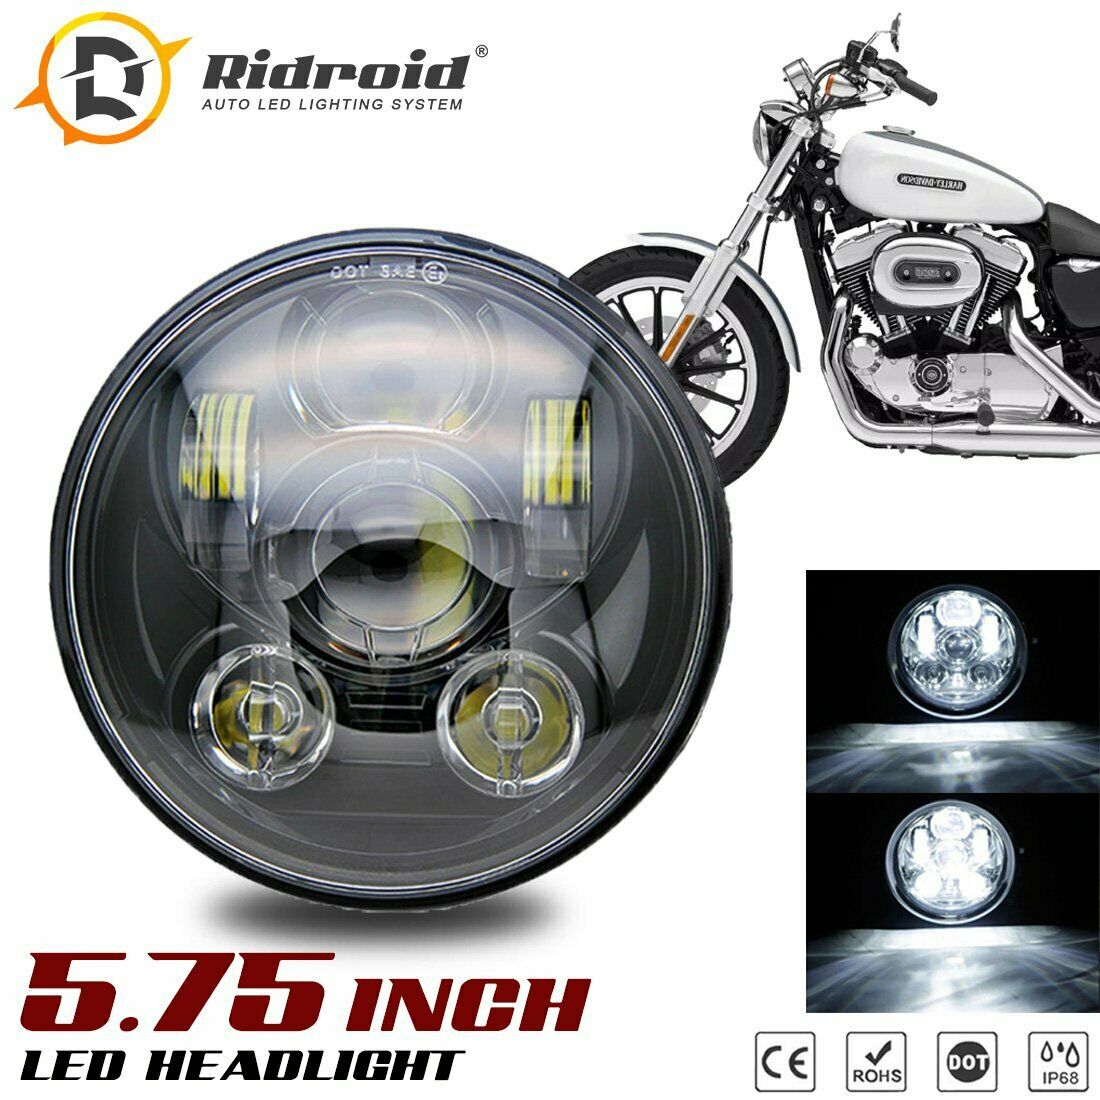 5-3/4" Round Projector LED Headlight Light For Harley Dyna Softail Sportster 